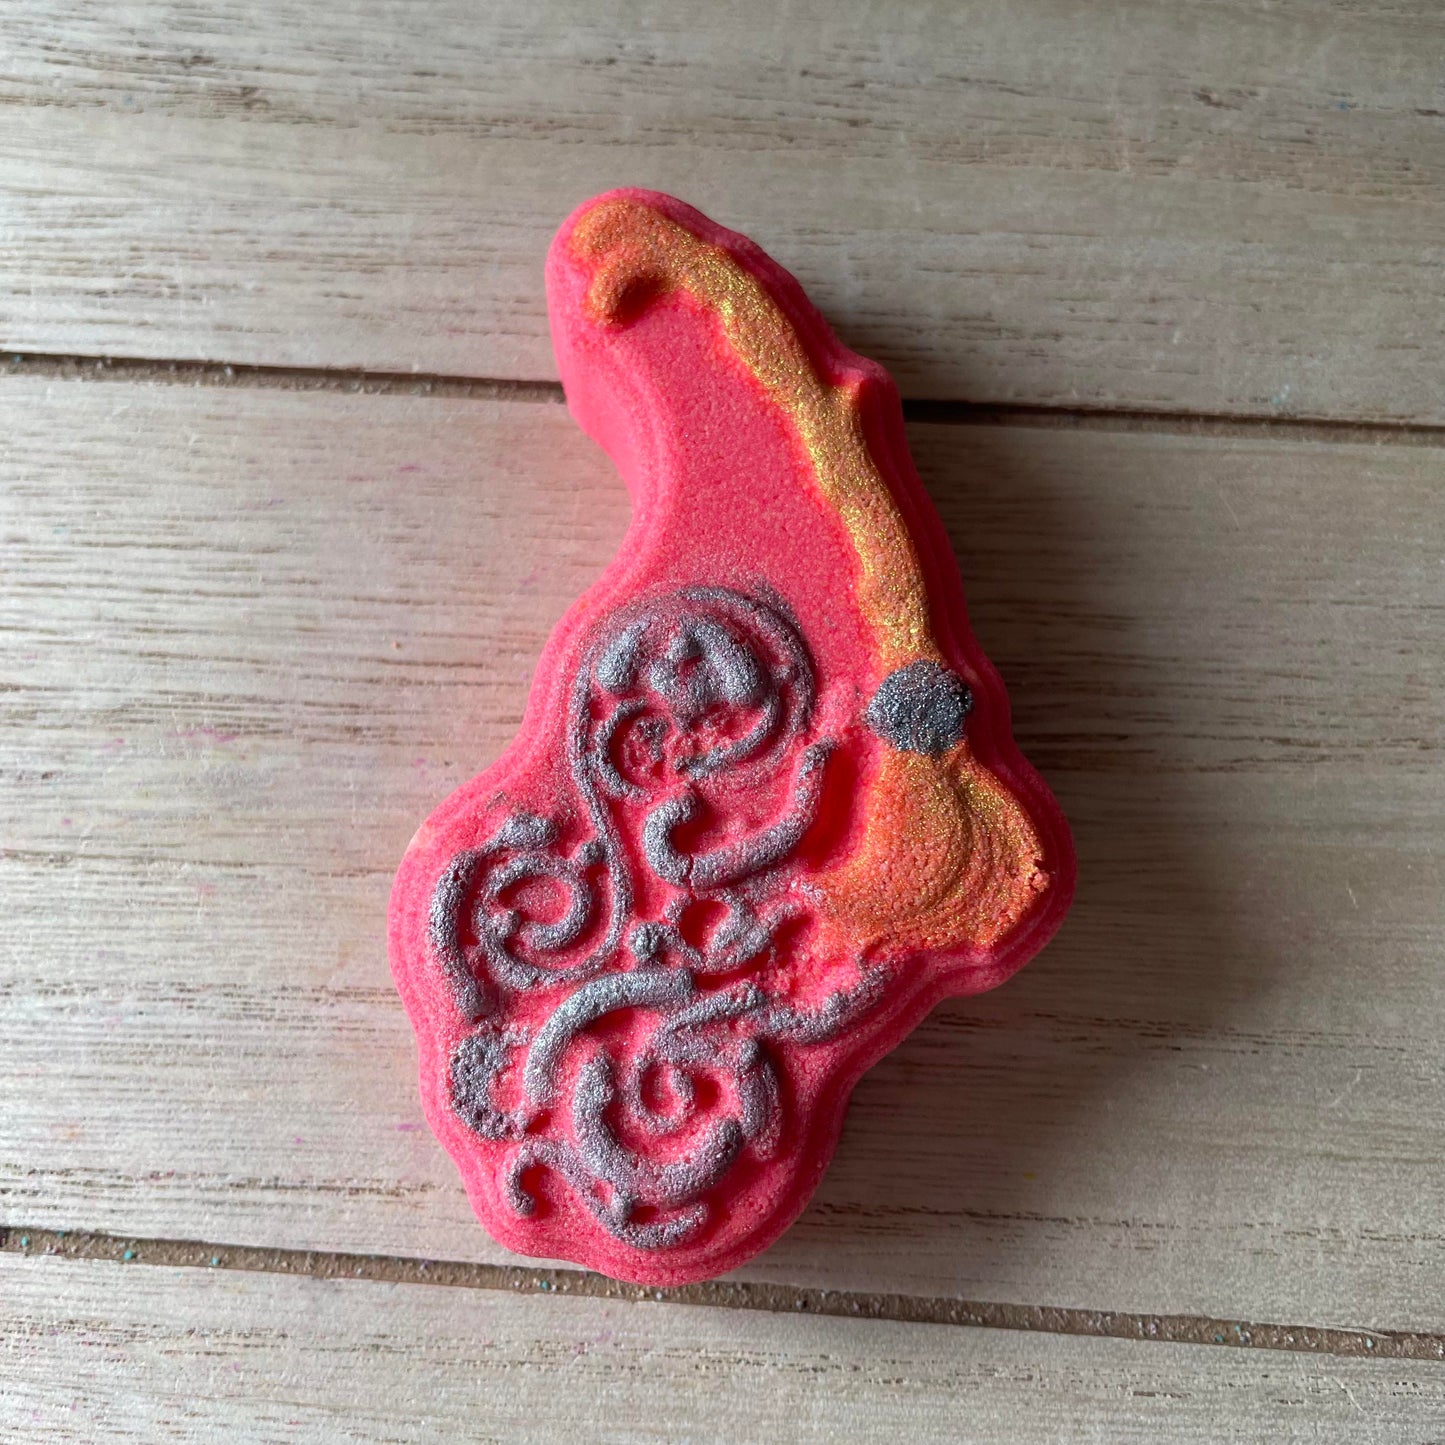 Magical Witches Broom Vacuum Mold